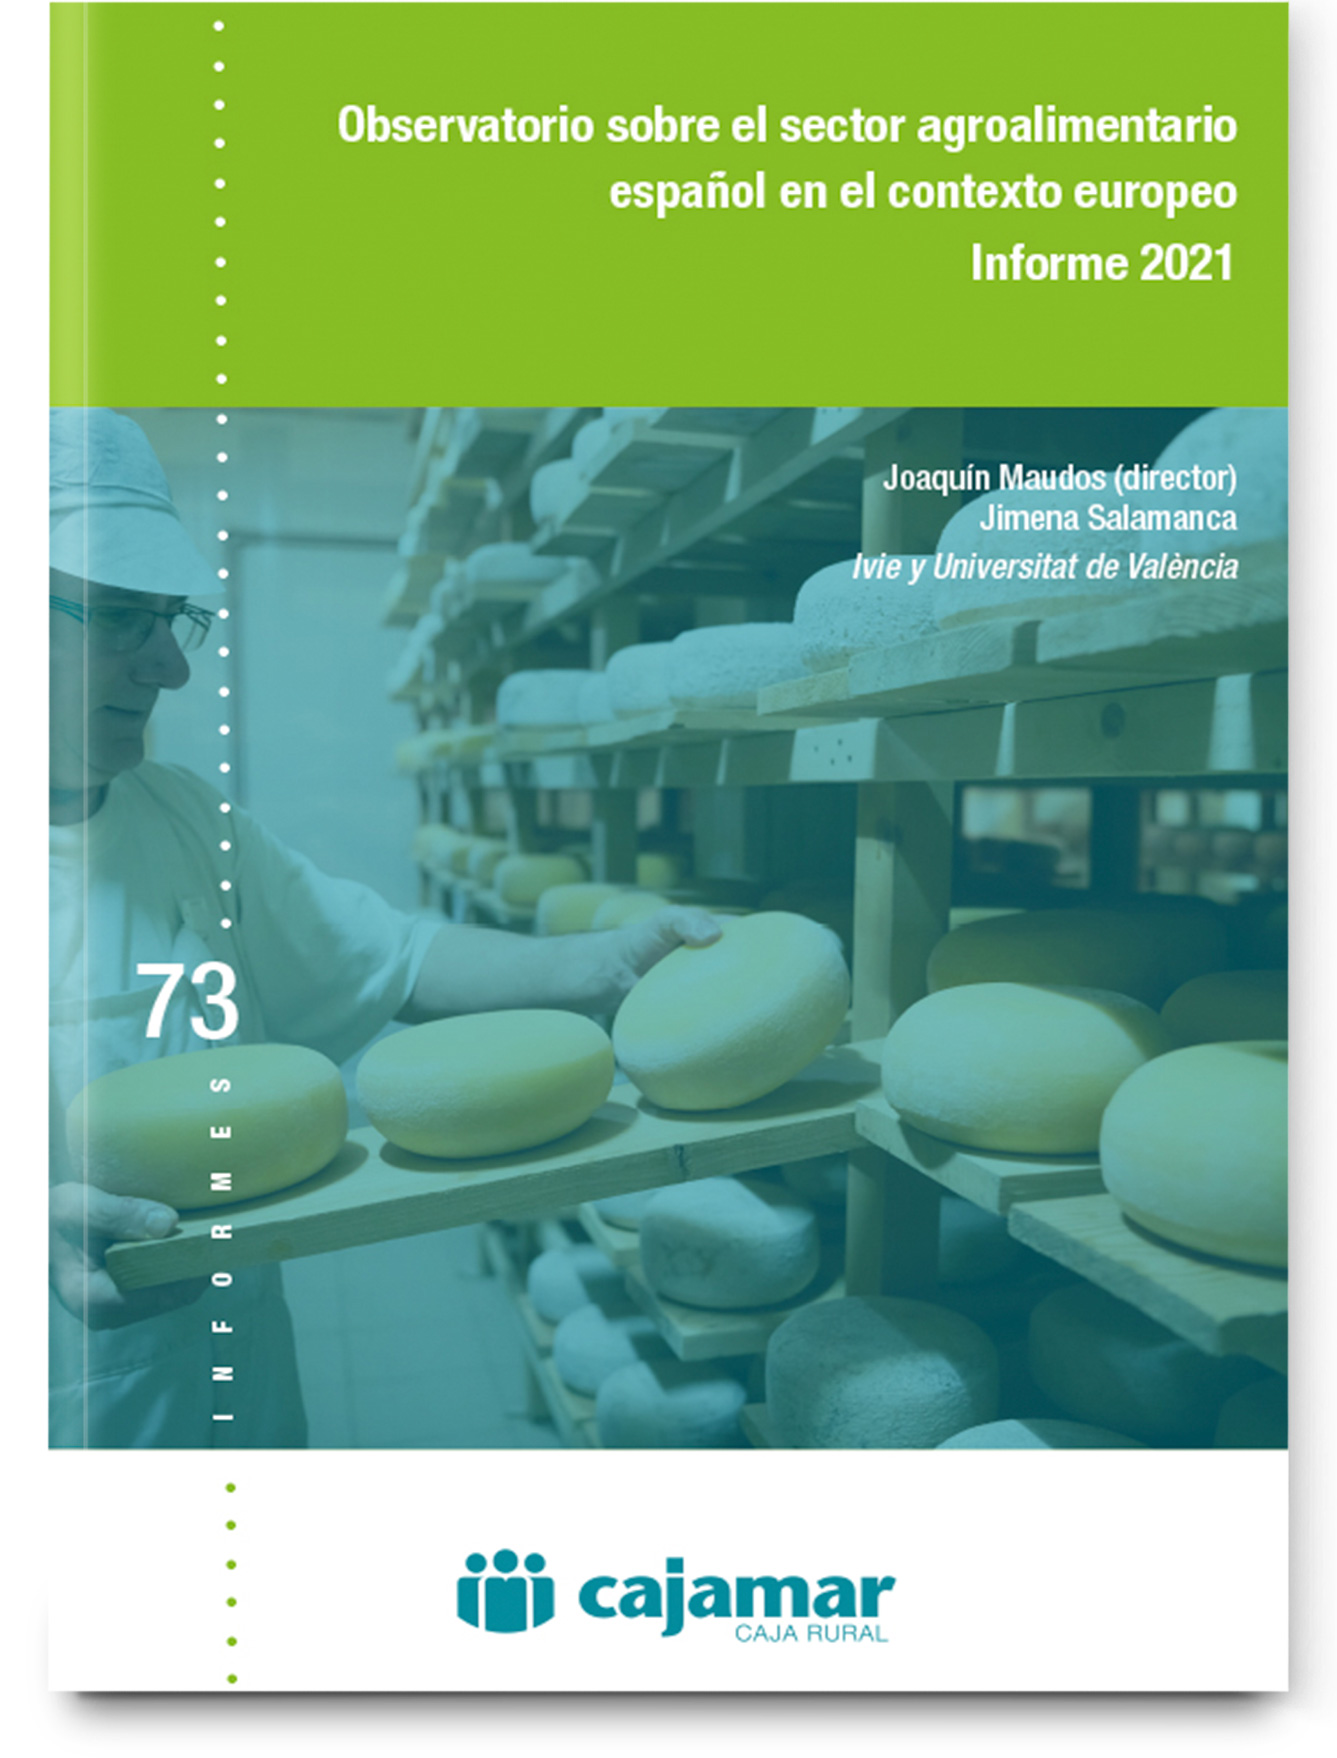 The Spanish agri-food sector in the European context. 2021 Report